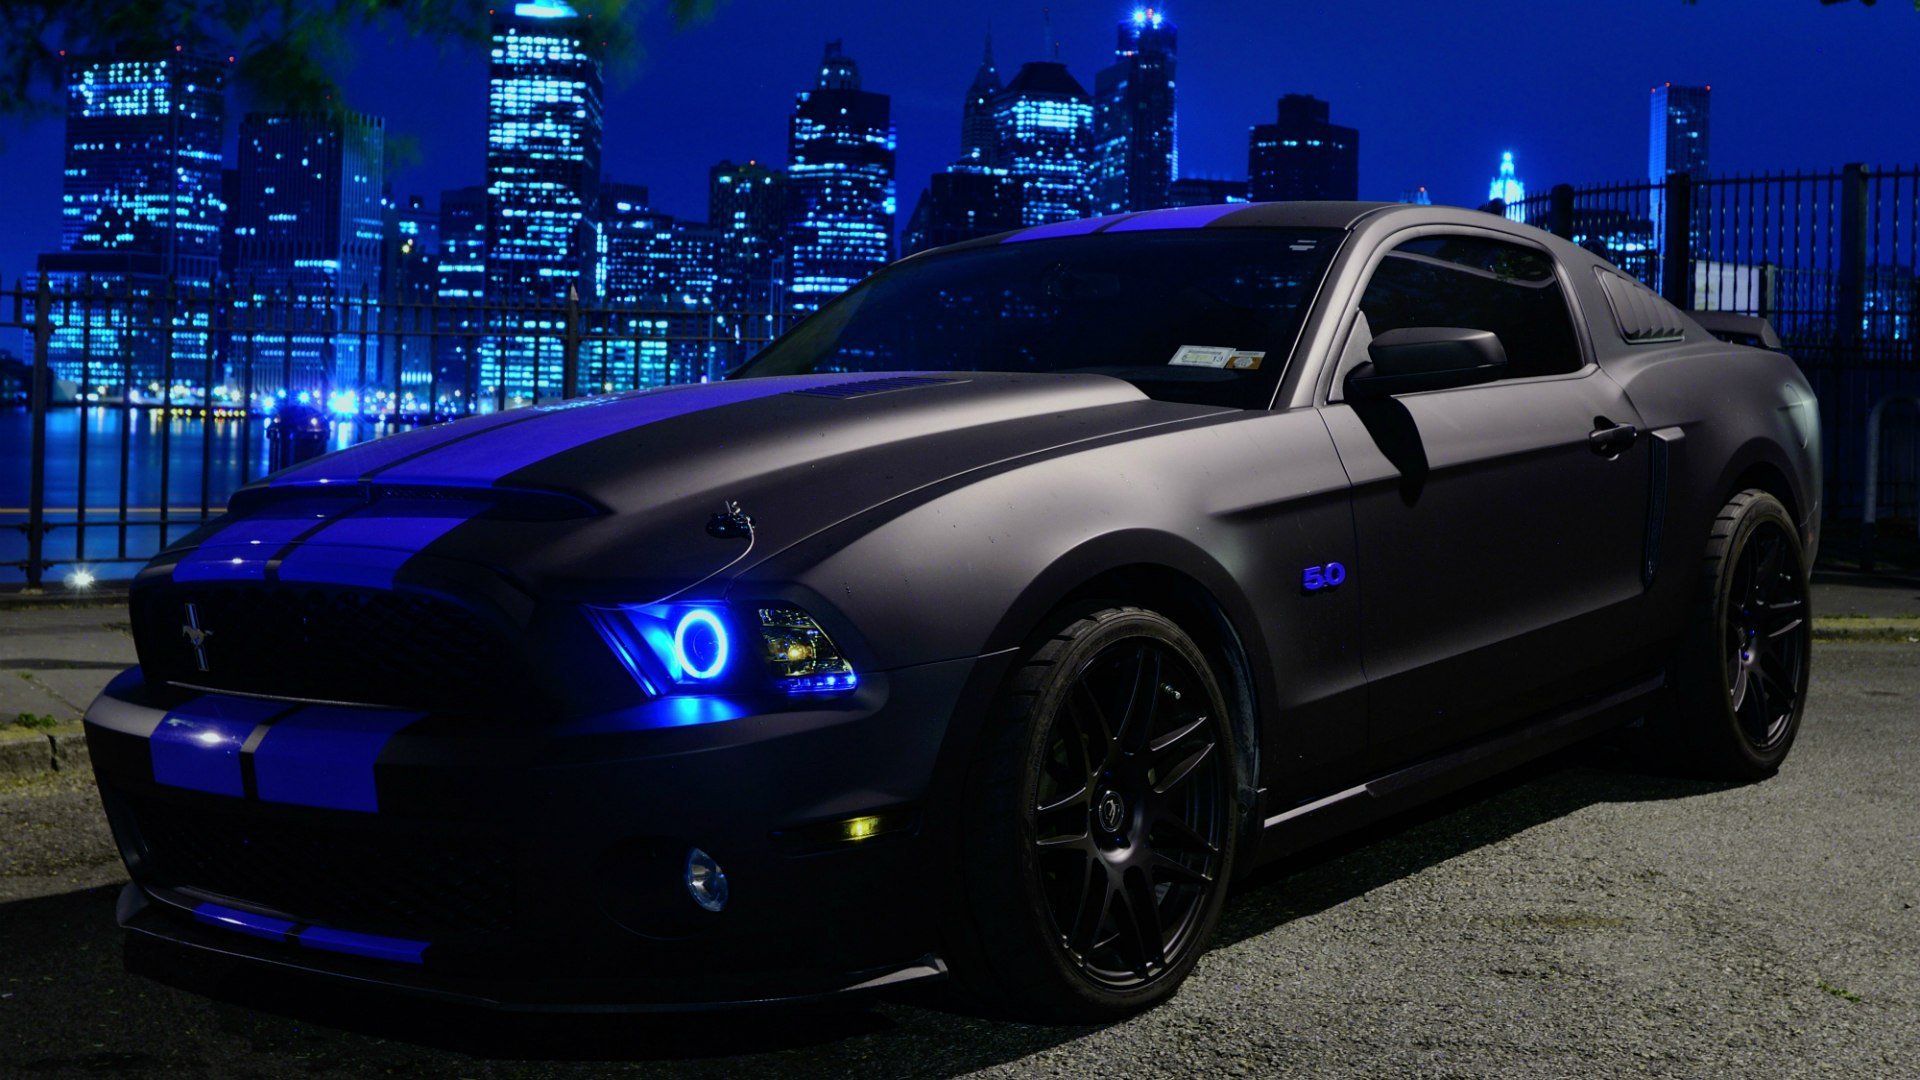 Free download Ford Mustang HD Wallpaper Picture Image [1920x1080] for your Desktop, Mobile & Tablet. Explore 67 Mustang Wallpaper Mustang Wallpaper, Mustang Gt Wallpaper, 67 Mustang Coupe Wallpaper